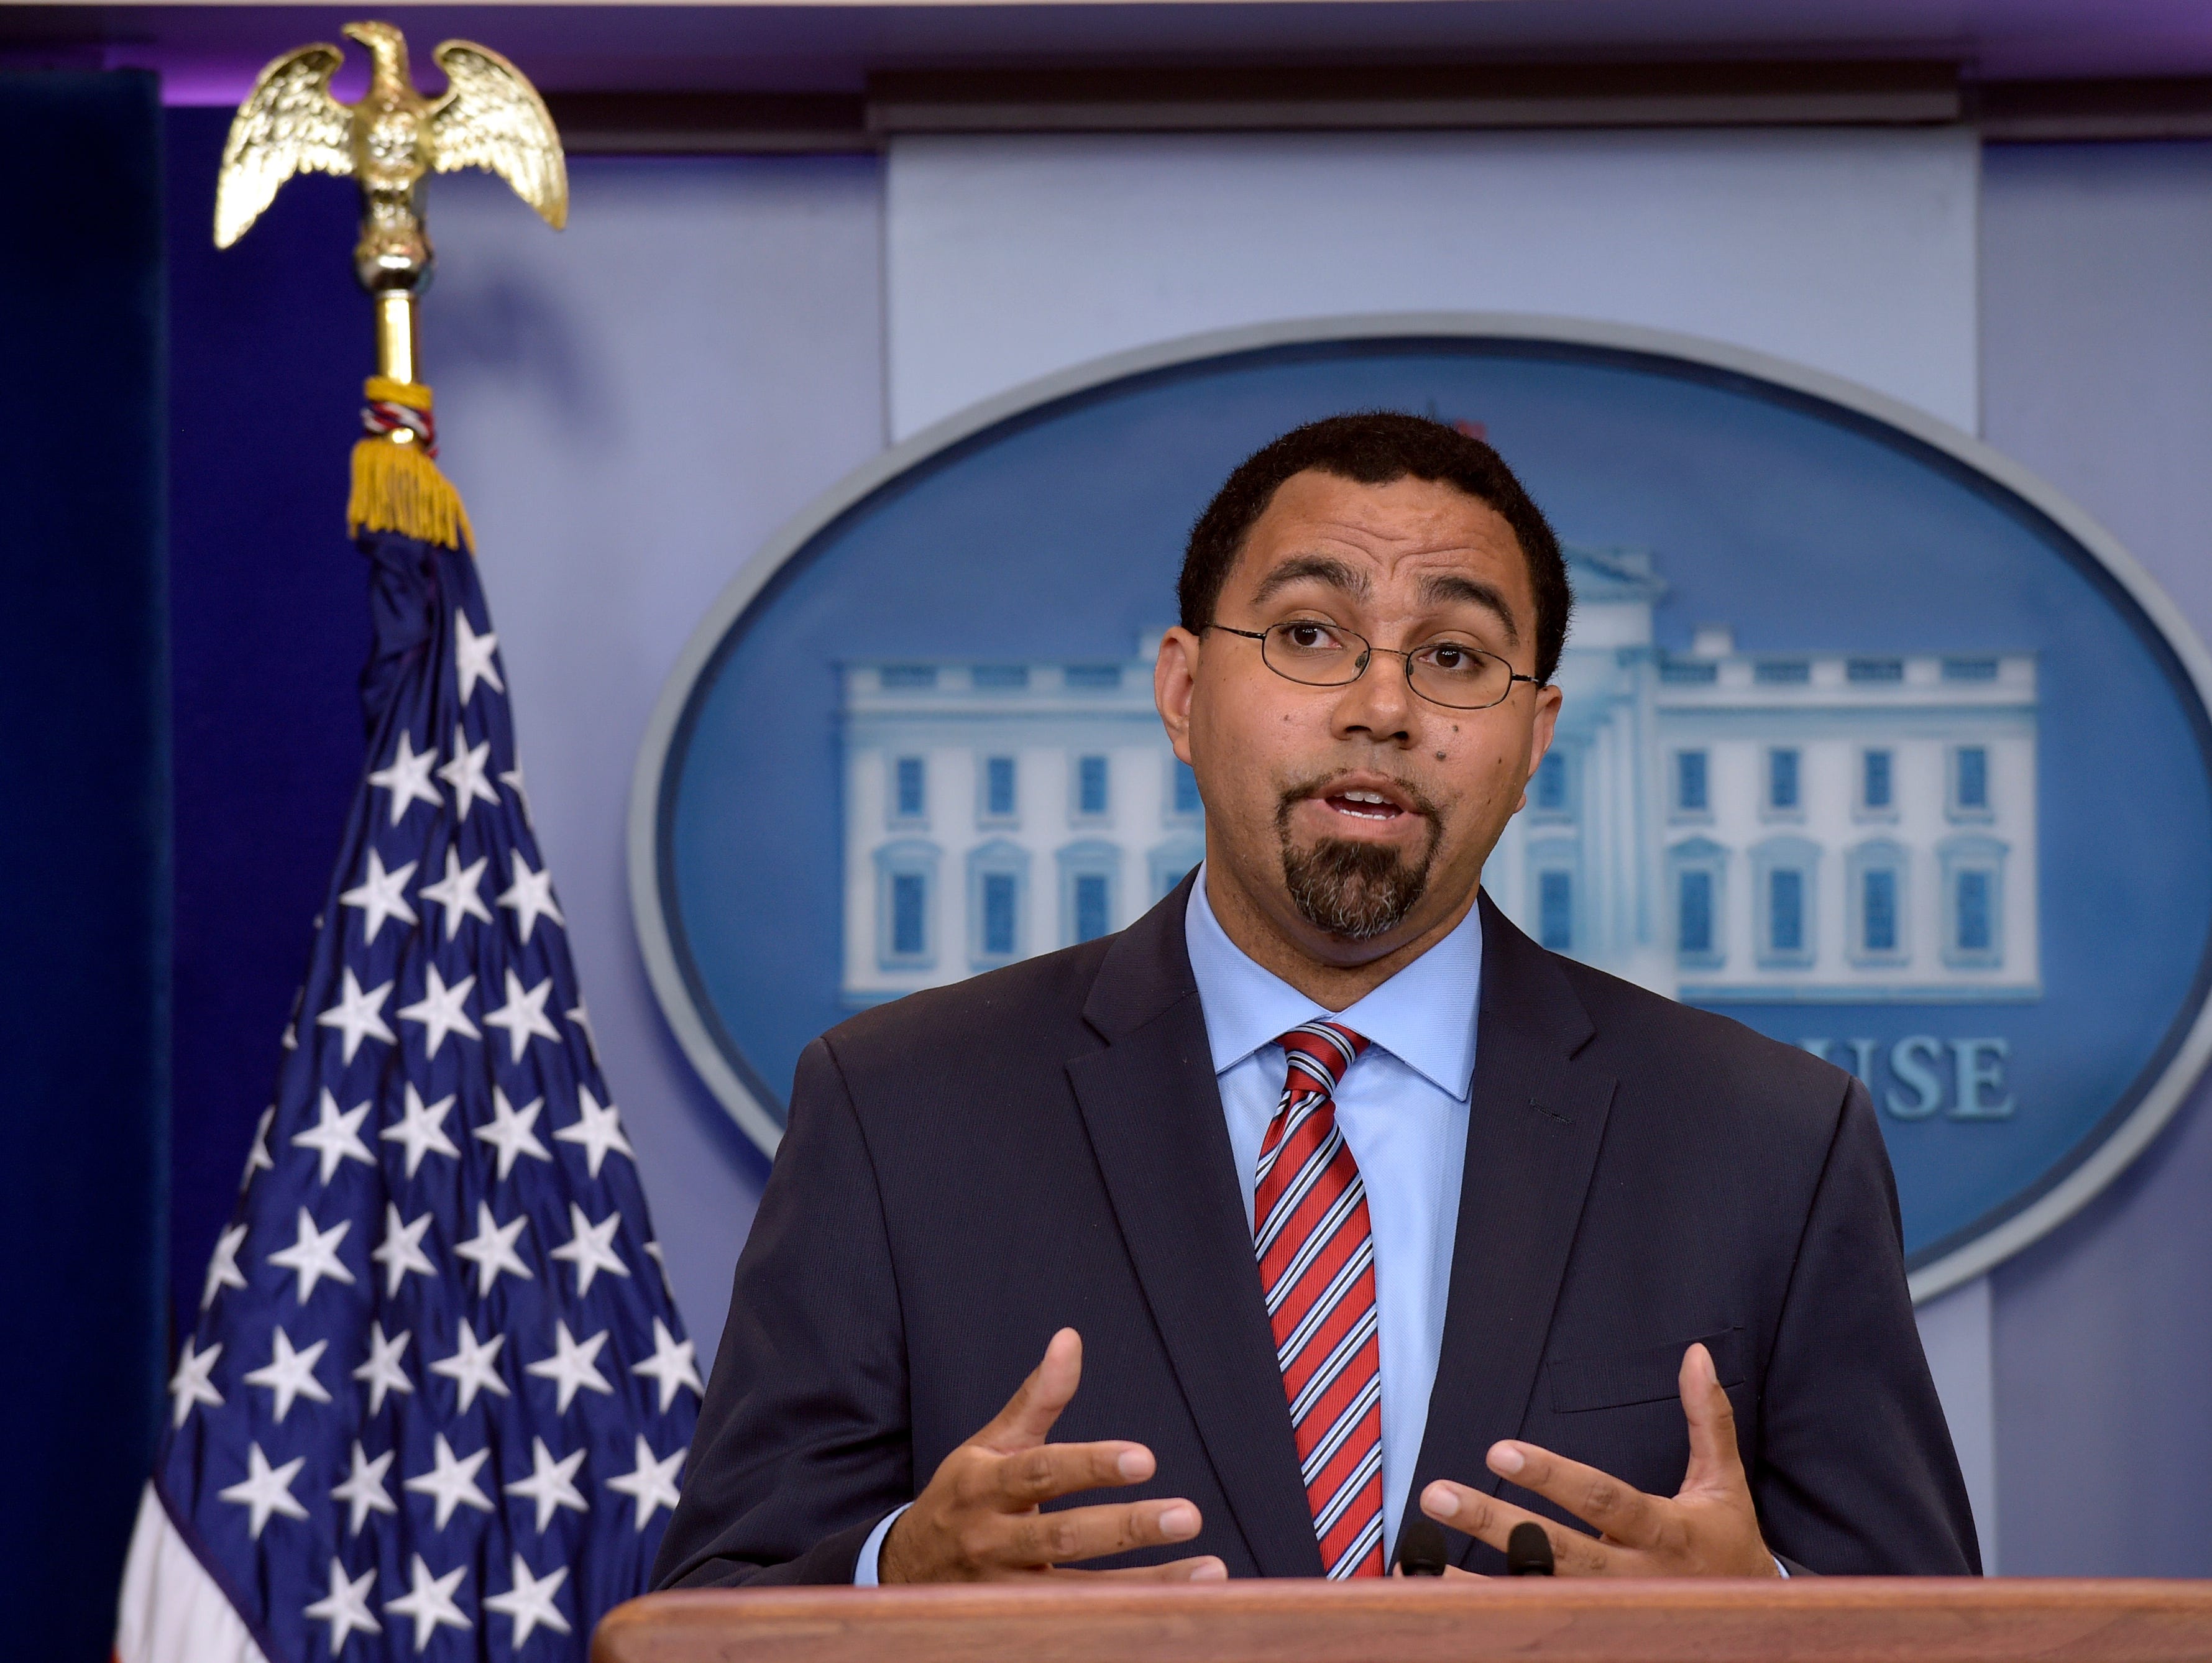 Education Secretary John King speaks during the daily briefing at the White House in Washington, Thursday, Sept. 29, 2016. (AP Photo/Susan Walsh)